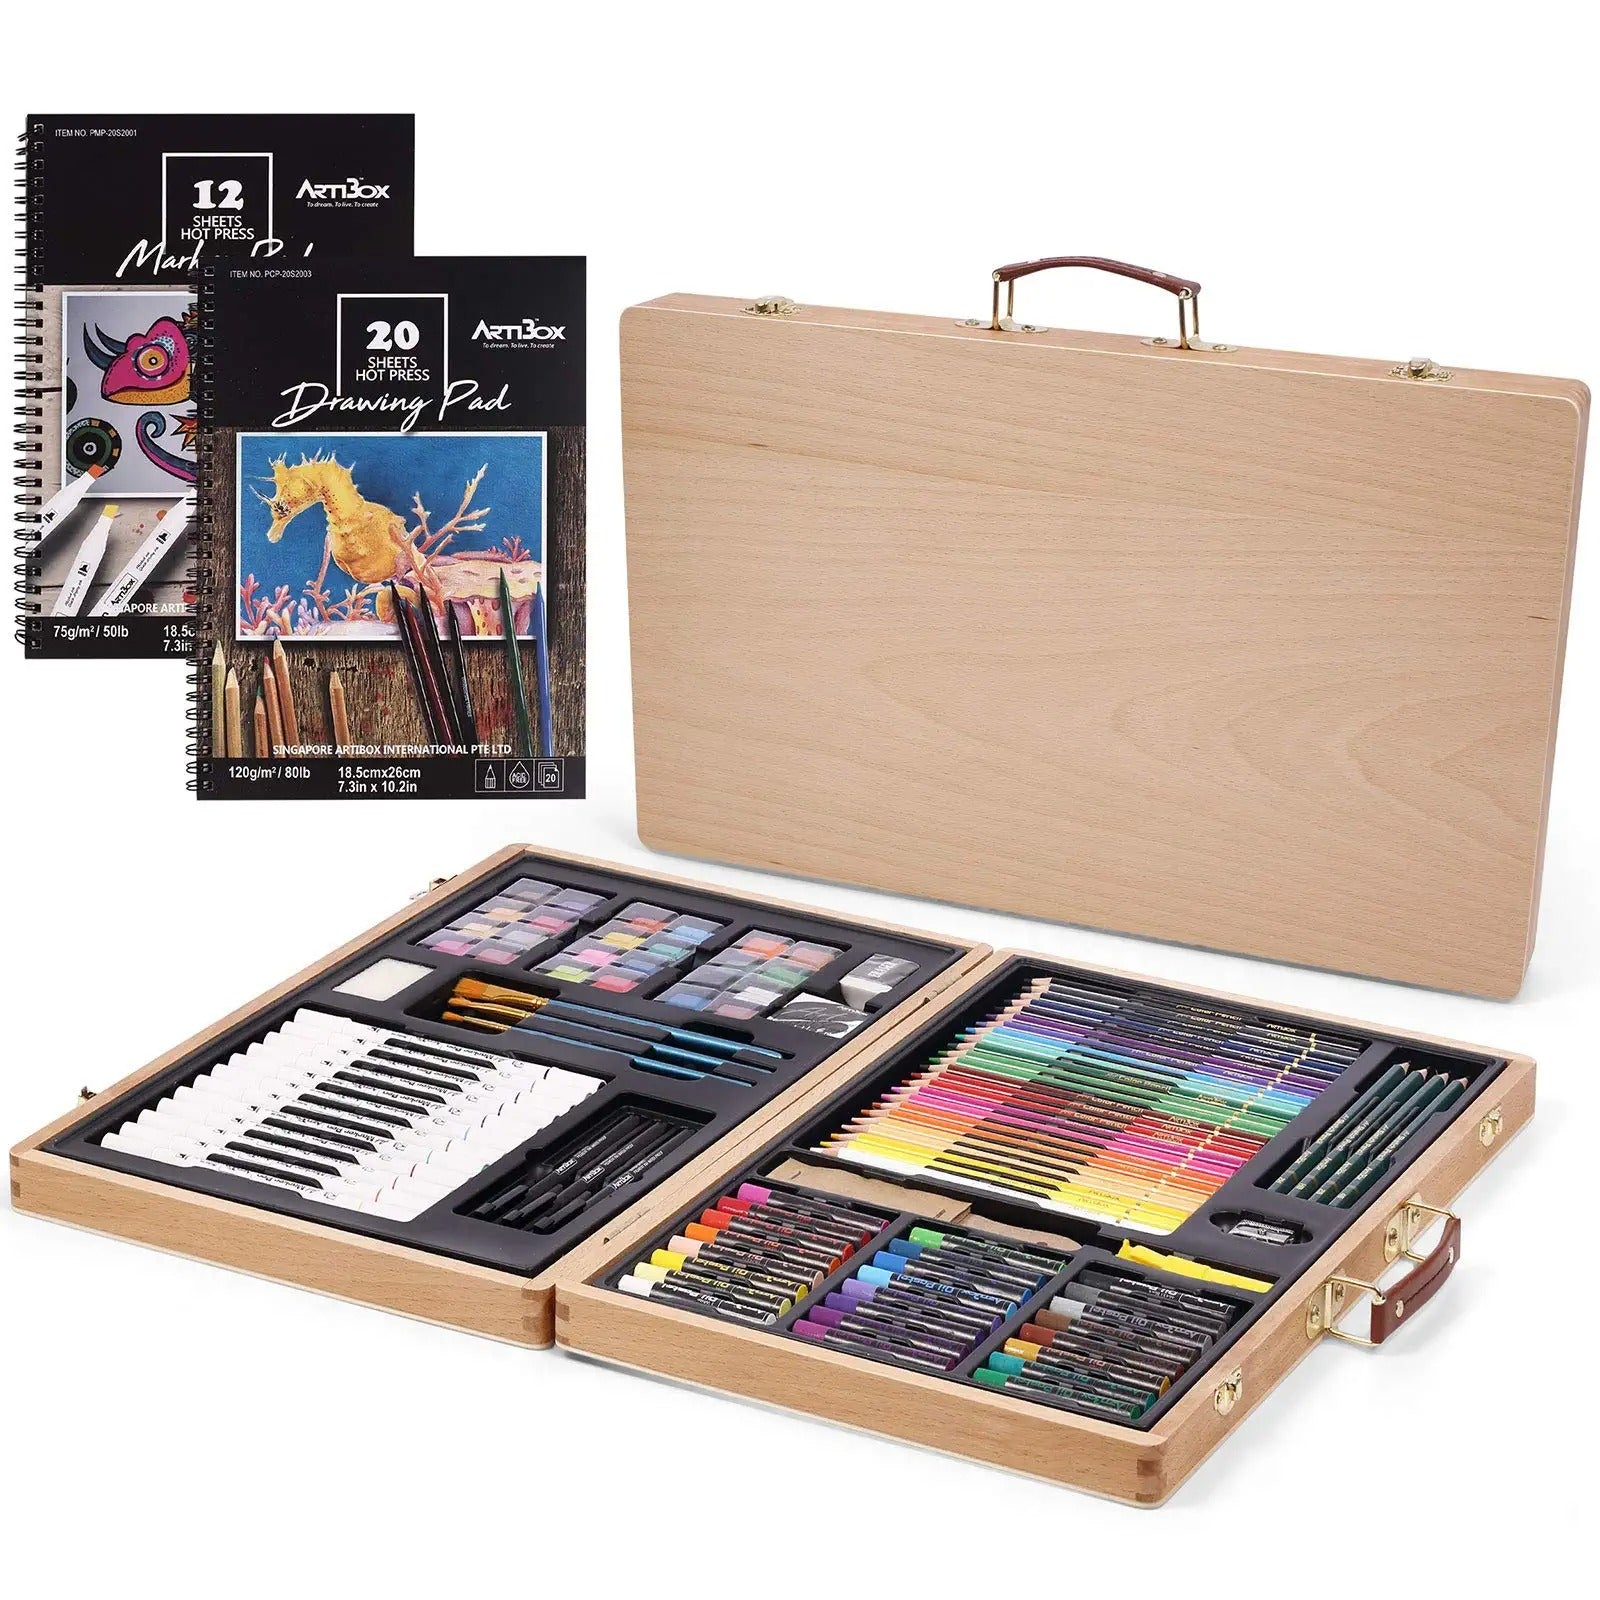 145 Pcs Professional Art Set - Deluxe Art Set Artists Sketching & Colouring  Case Supplies Provides Variety Sketch Coloring For Beginners Gift For Arti